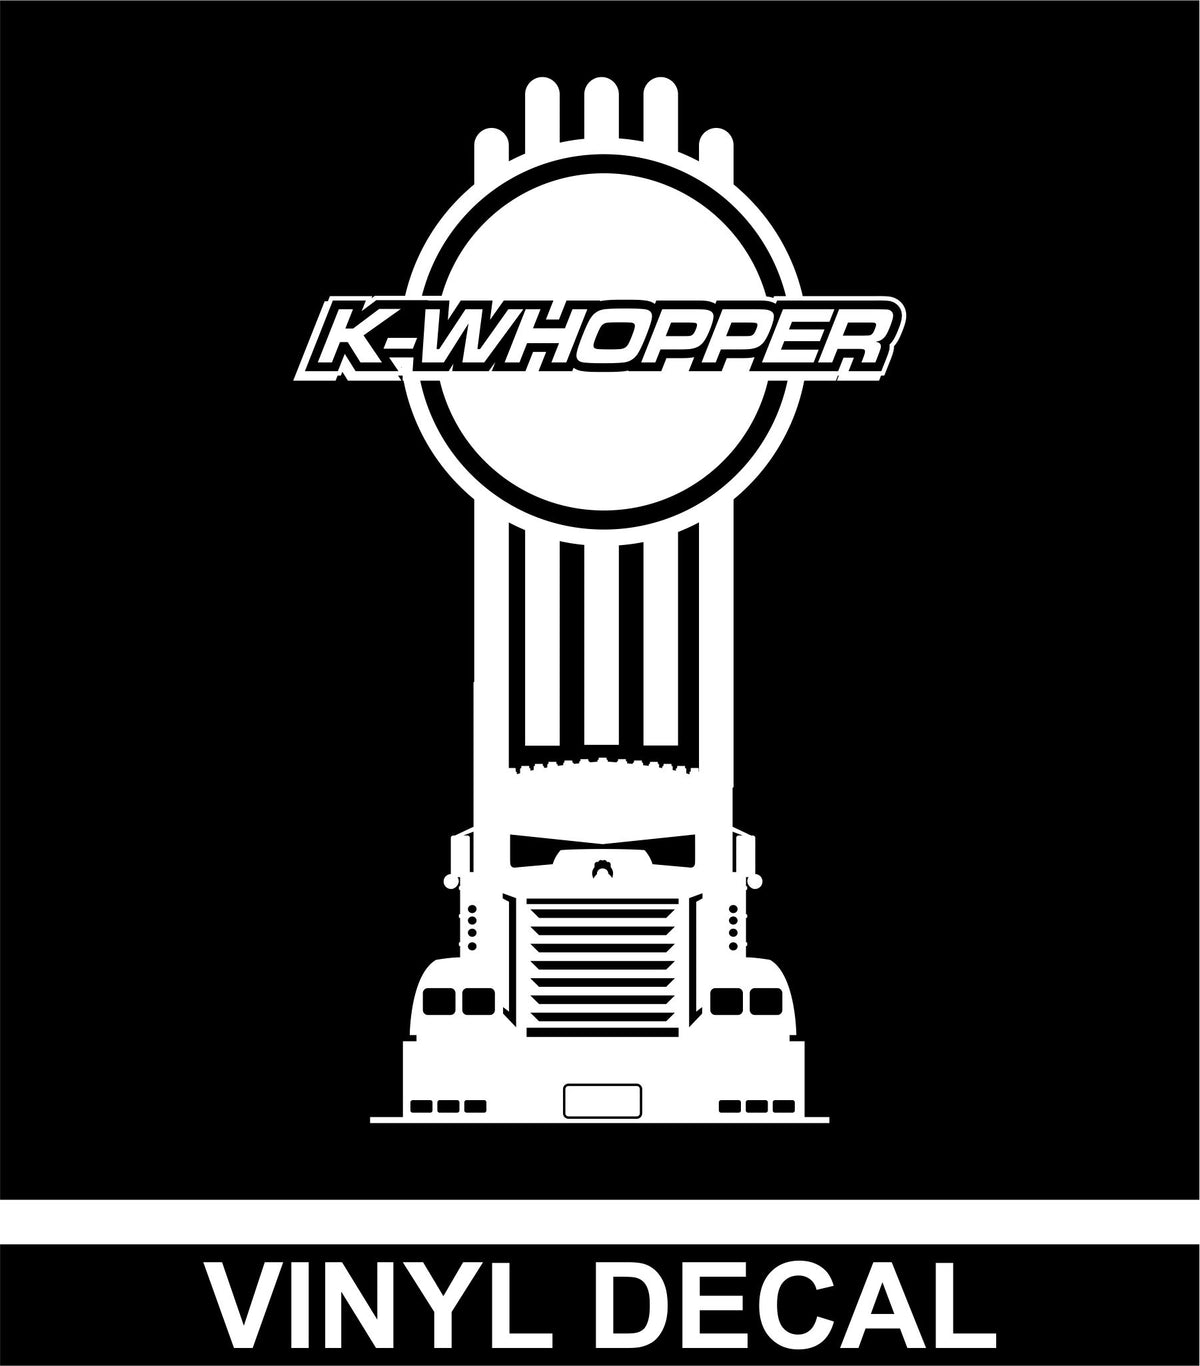 K-Whopper KW 900 - Vinyl Decal - Free Shipping